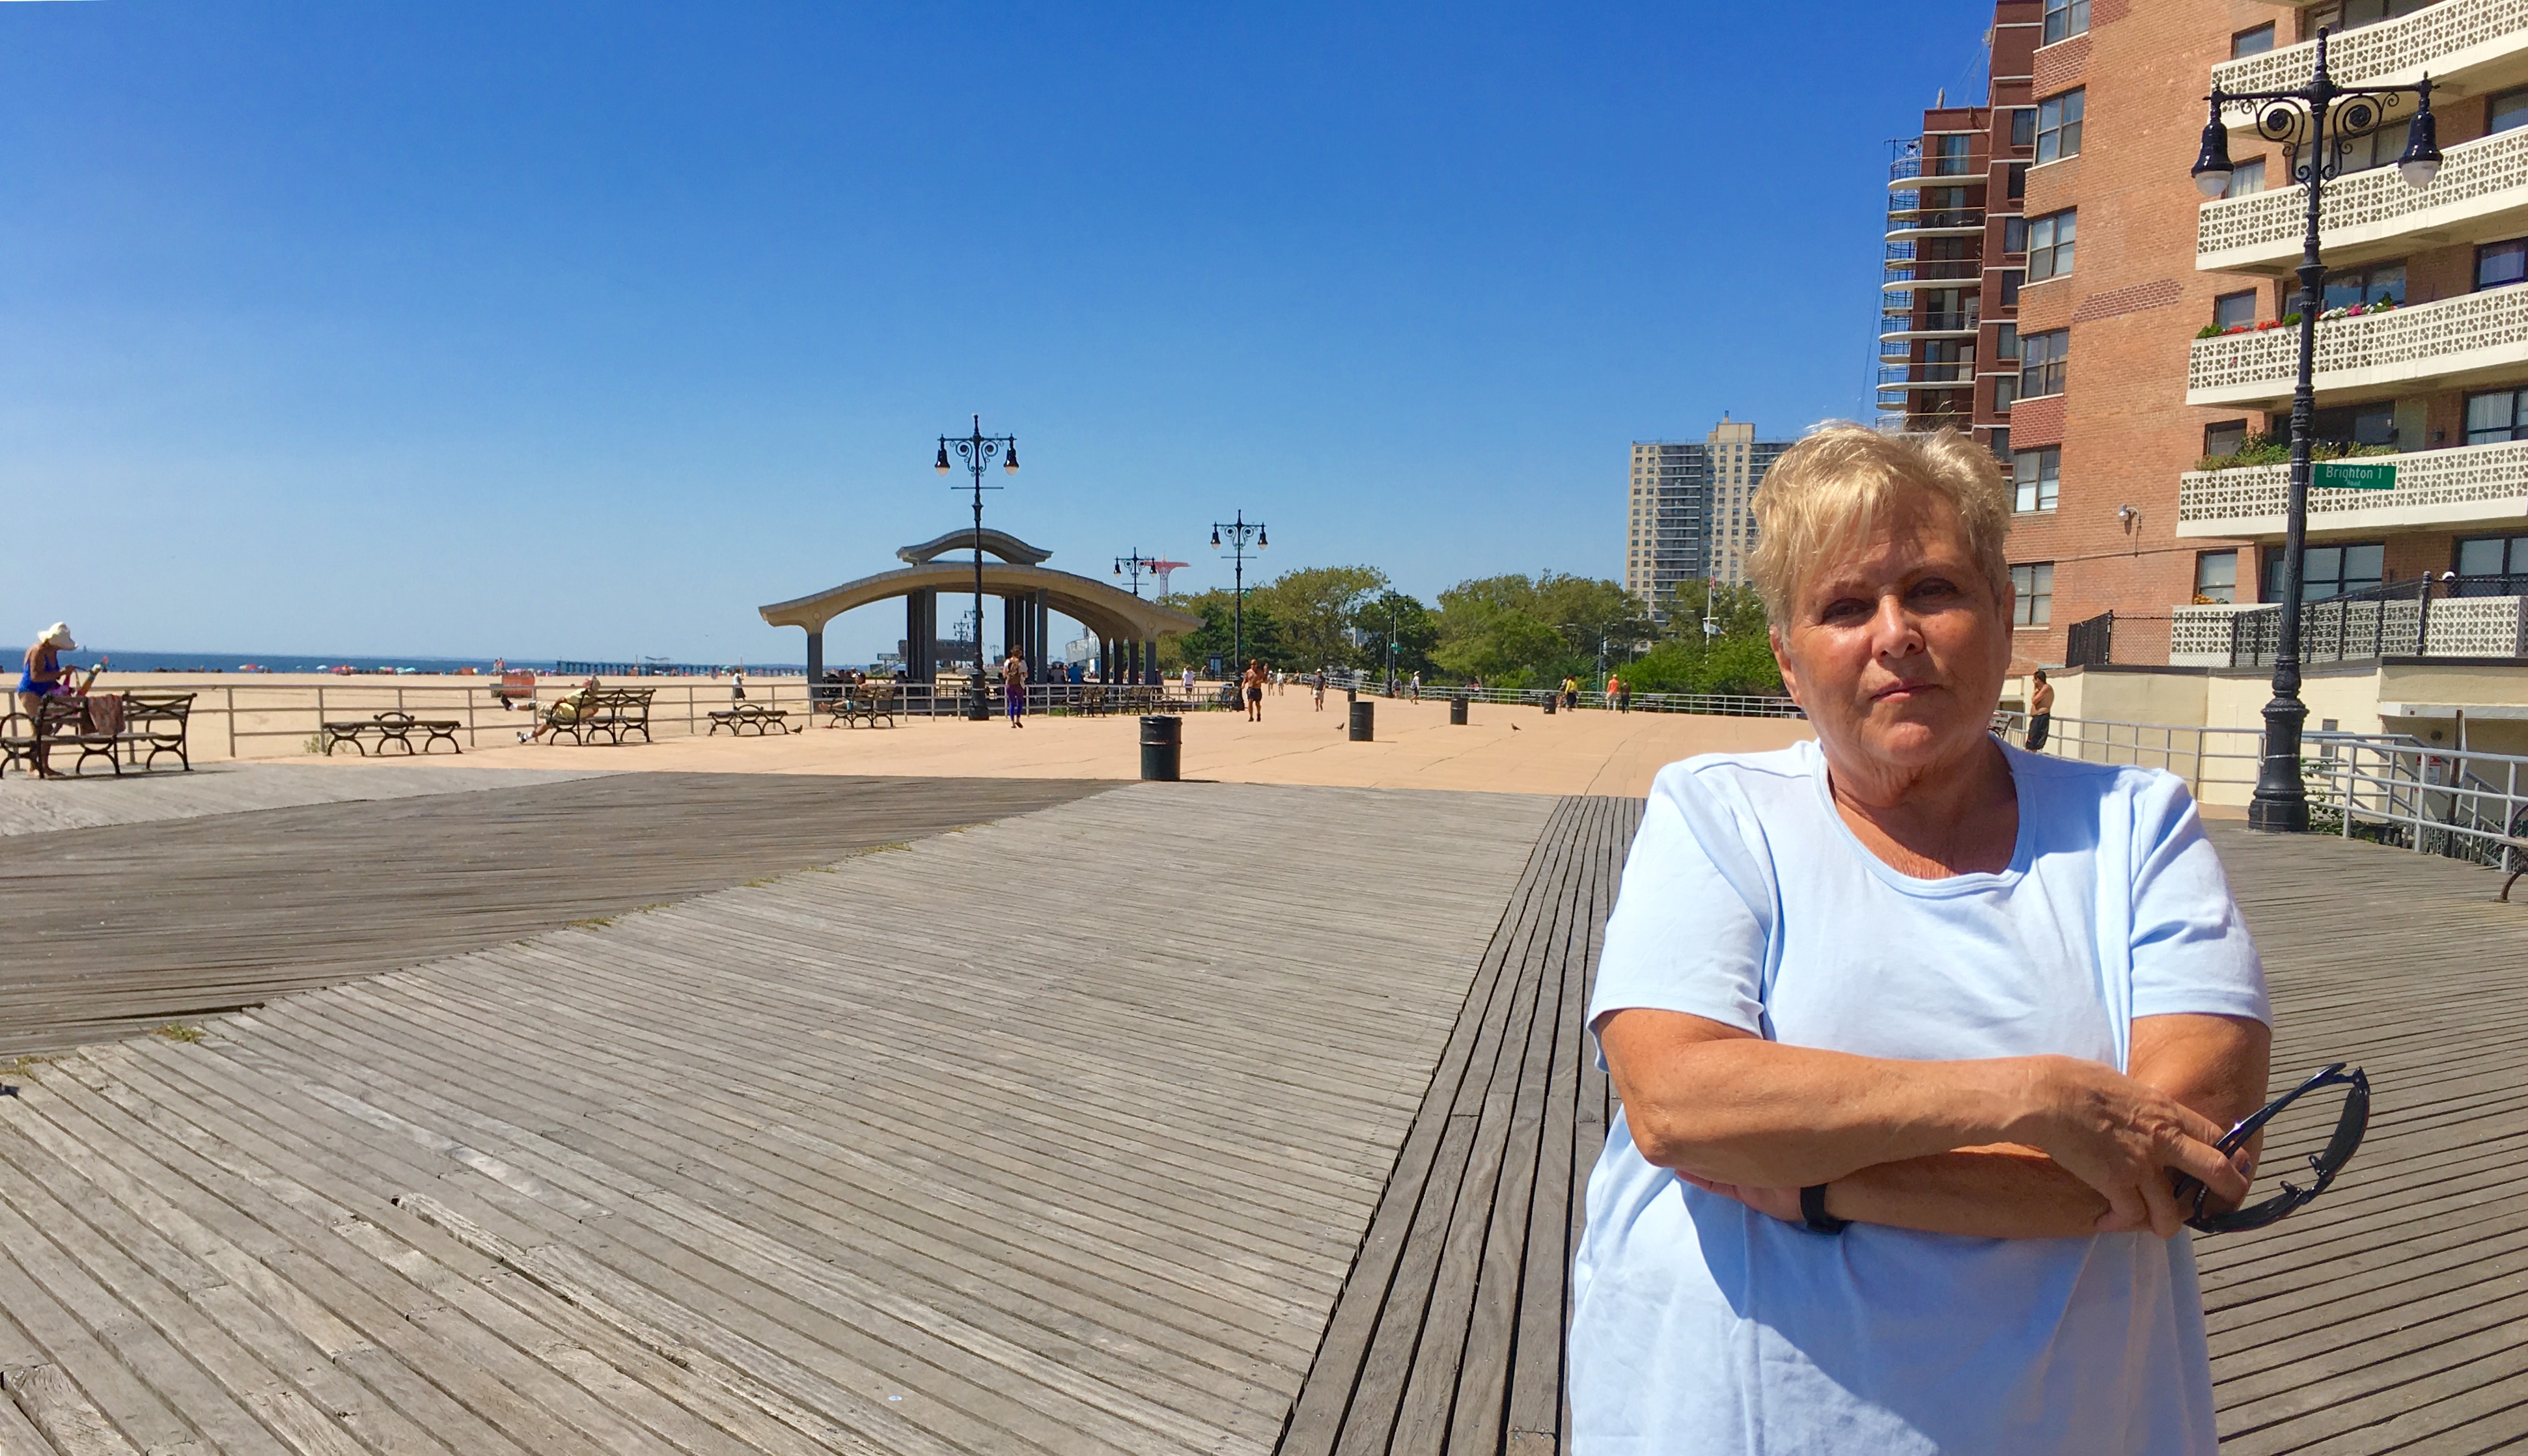 Brighton Beach activist Ida Sanoff says landmarking is meaningless if the Boardwalk isn’t repaired. Eagle photo by Lore Croghan